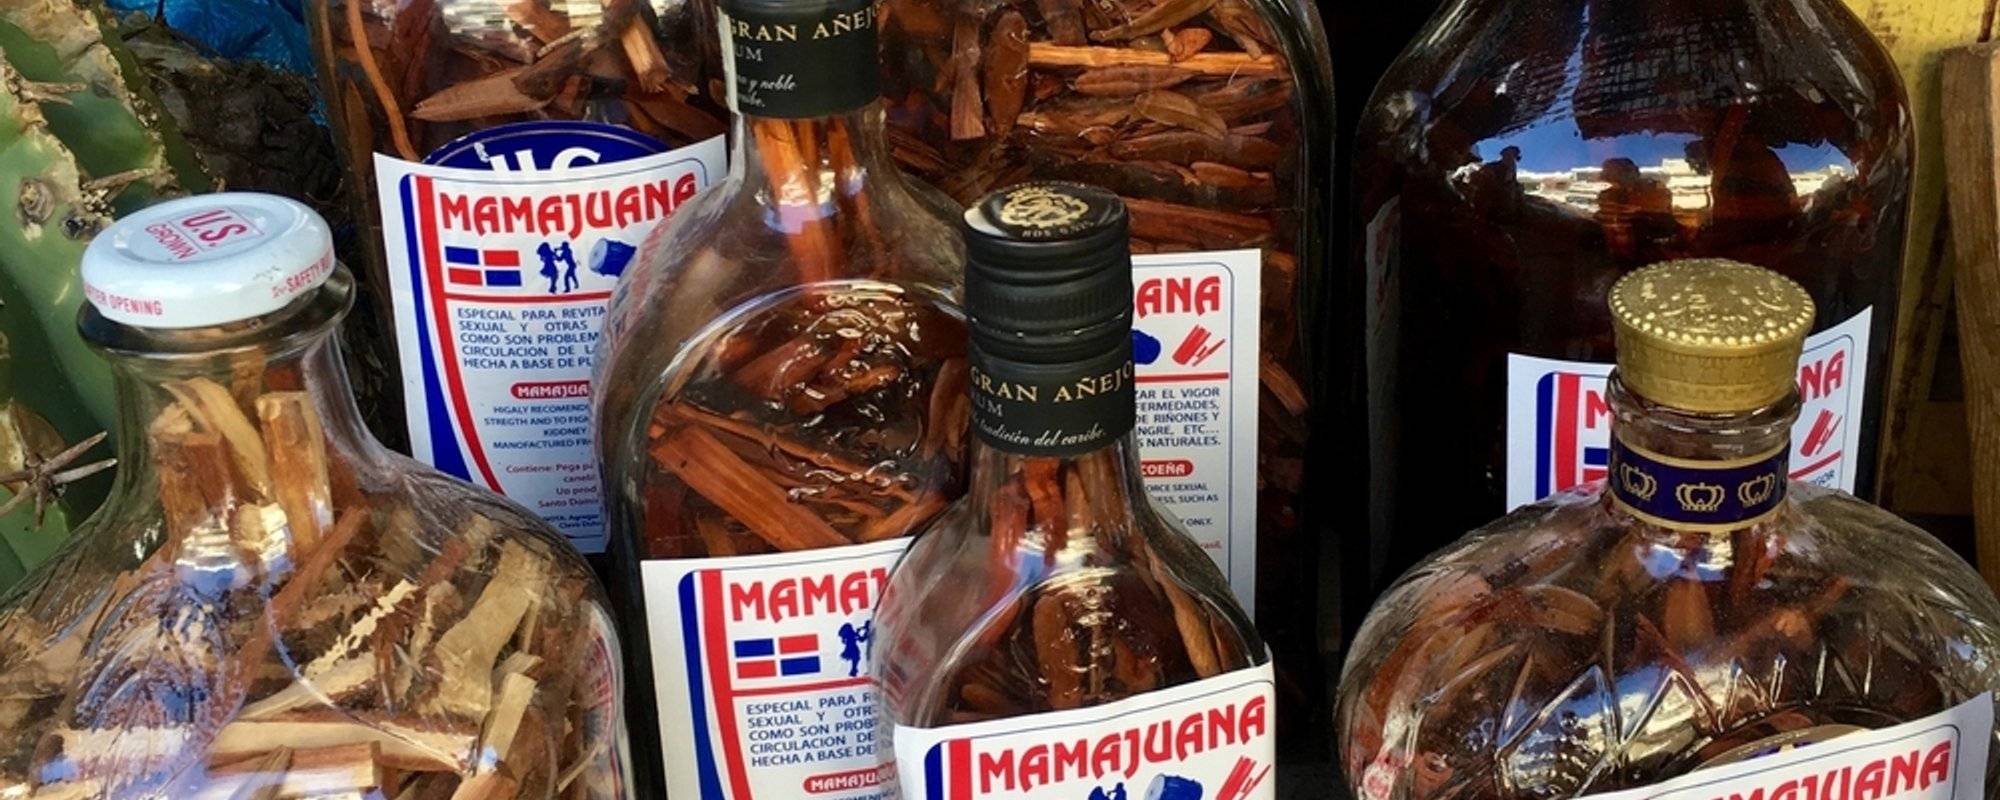 🍹 Mamajuana🍹 DOMINICAN VIAGRA🍹Miracle drug or rip off?